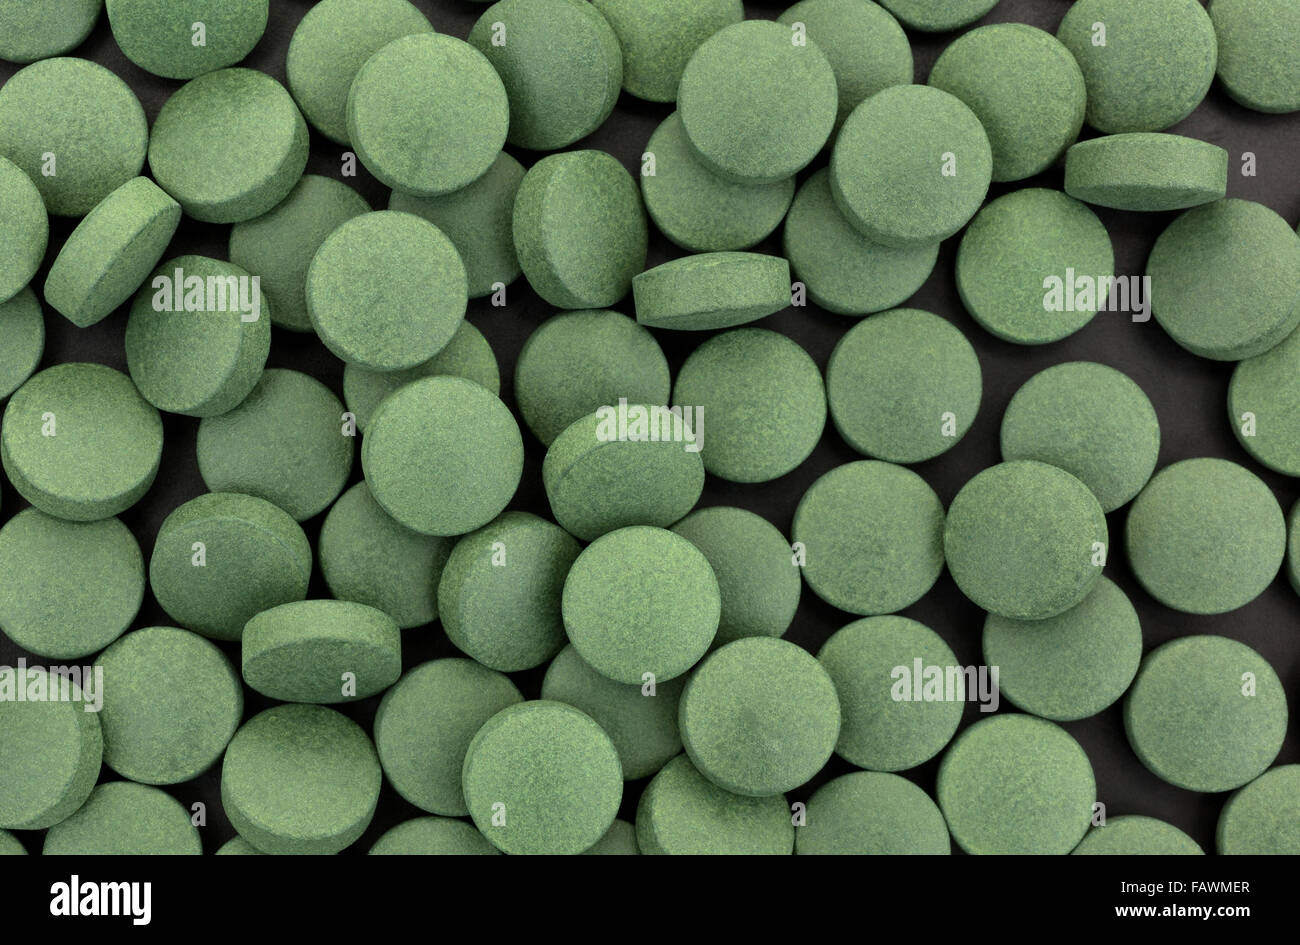 Top view of green iron supplement tablets on a black background Stock Photo  - Alamy